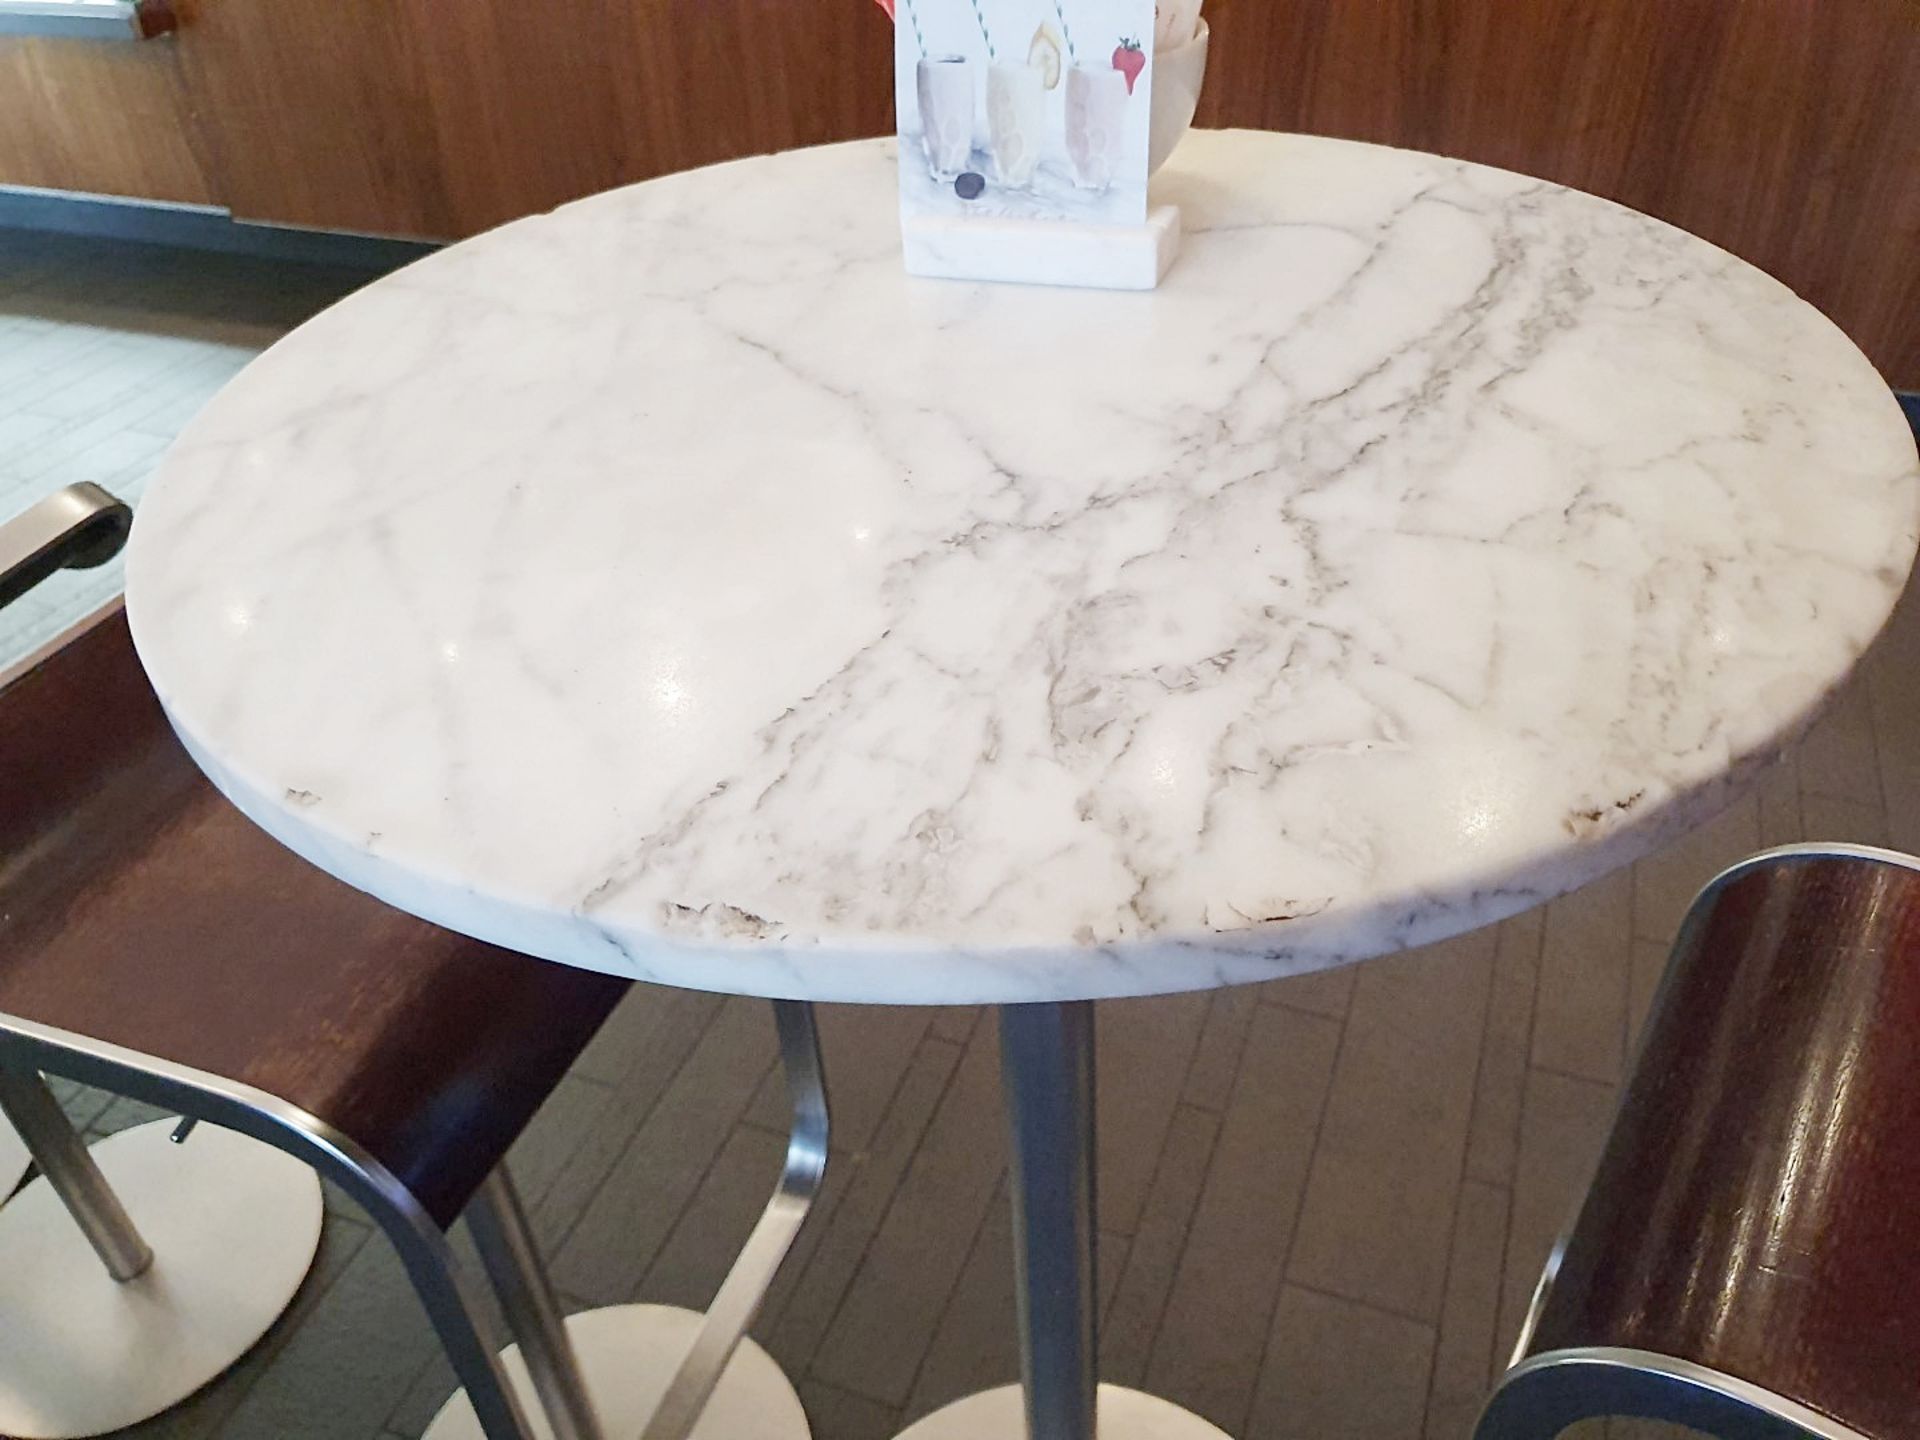 1 x Tall Round Marble/Granite Cocktail Bar Table - Dimensions: Diameter 60cm x Height 111cm - Ref: - Image 5 of 6